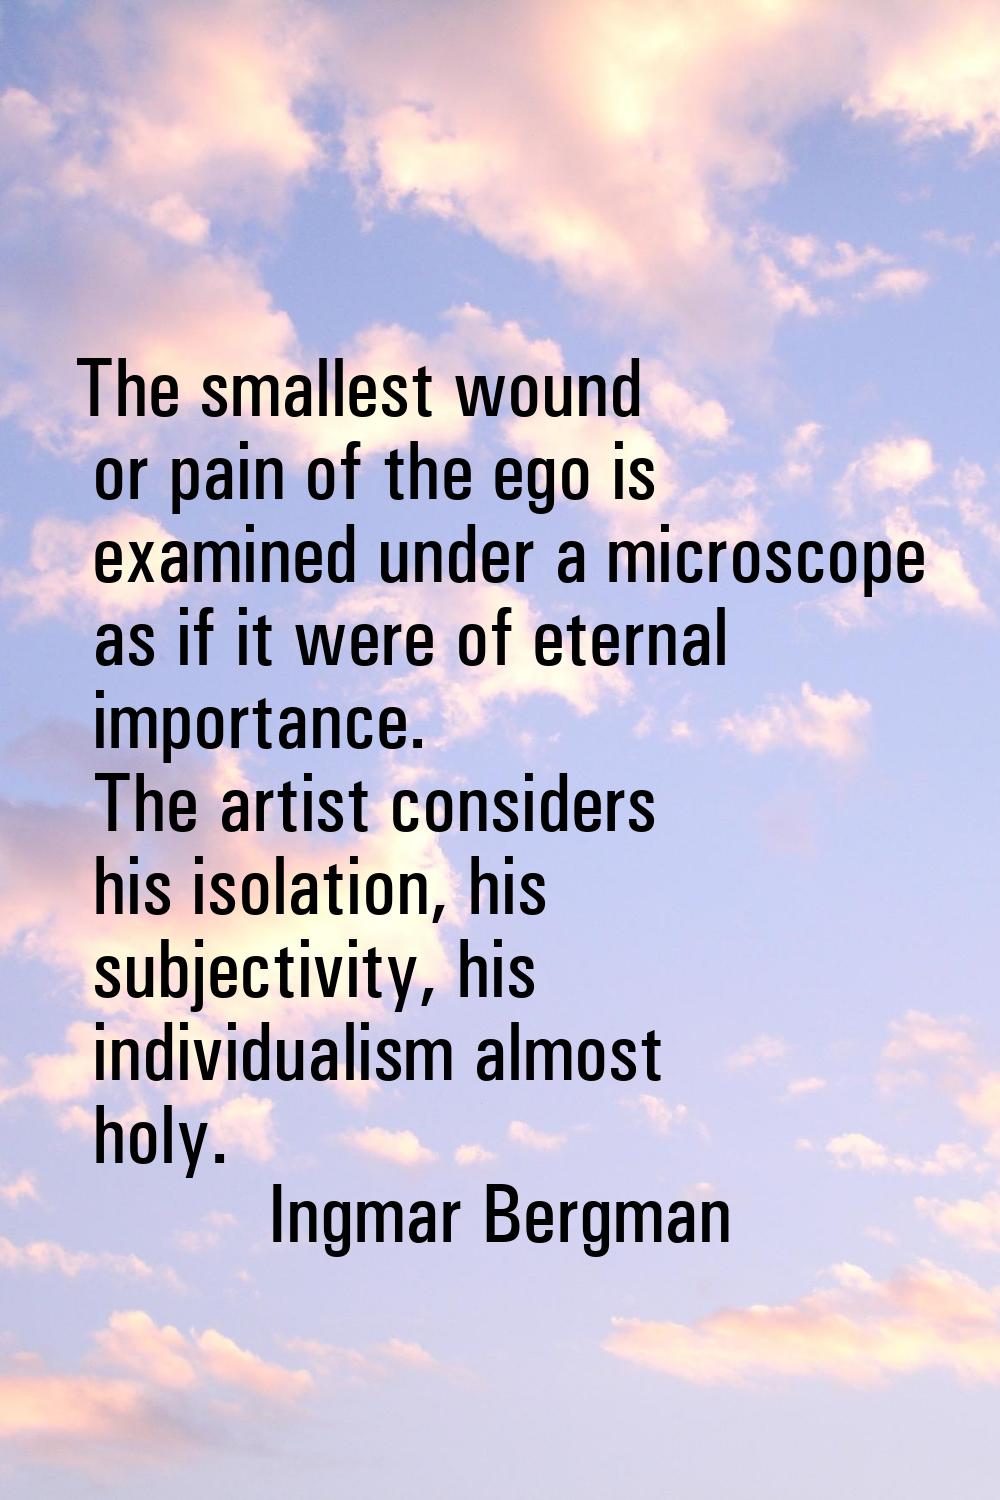 The smallest wound or pain of the ego is examined under a microscope as if it were of eternal impor